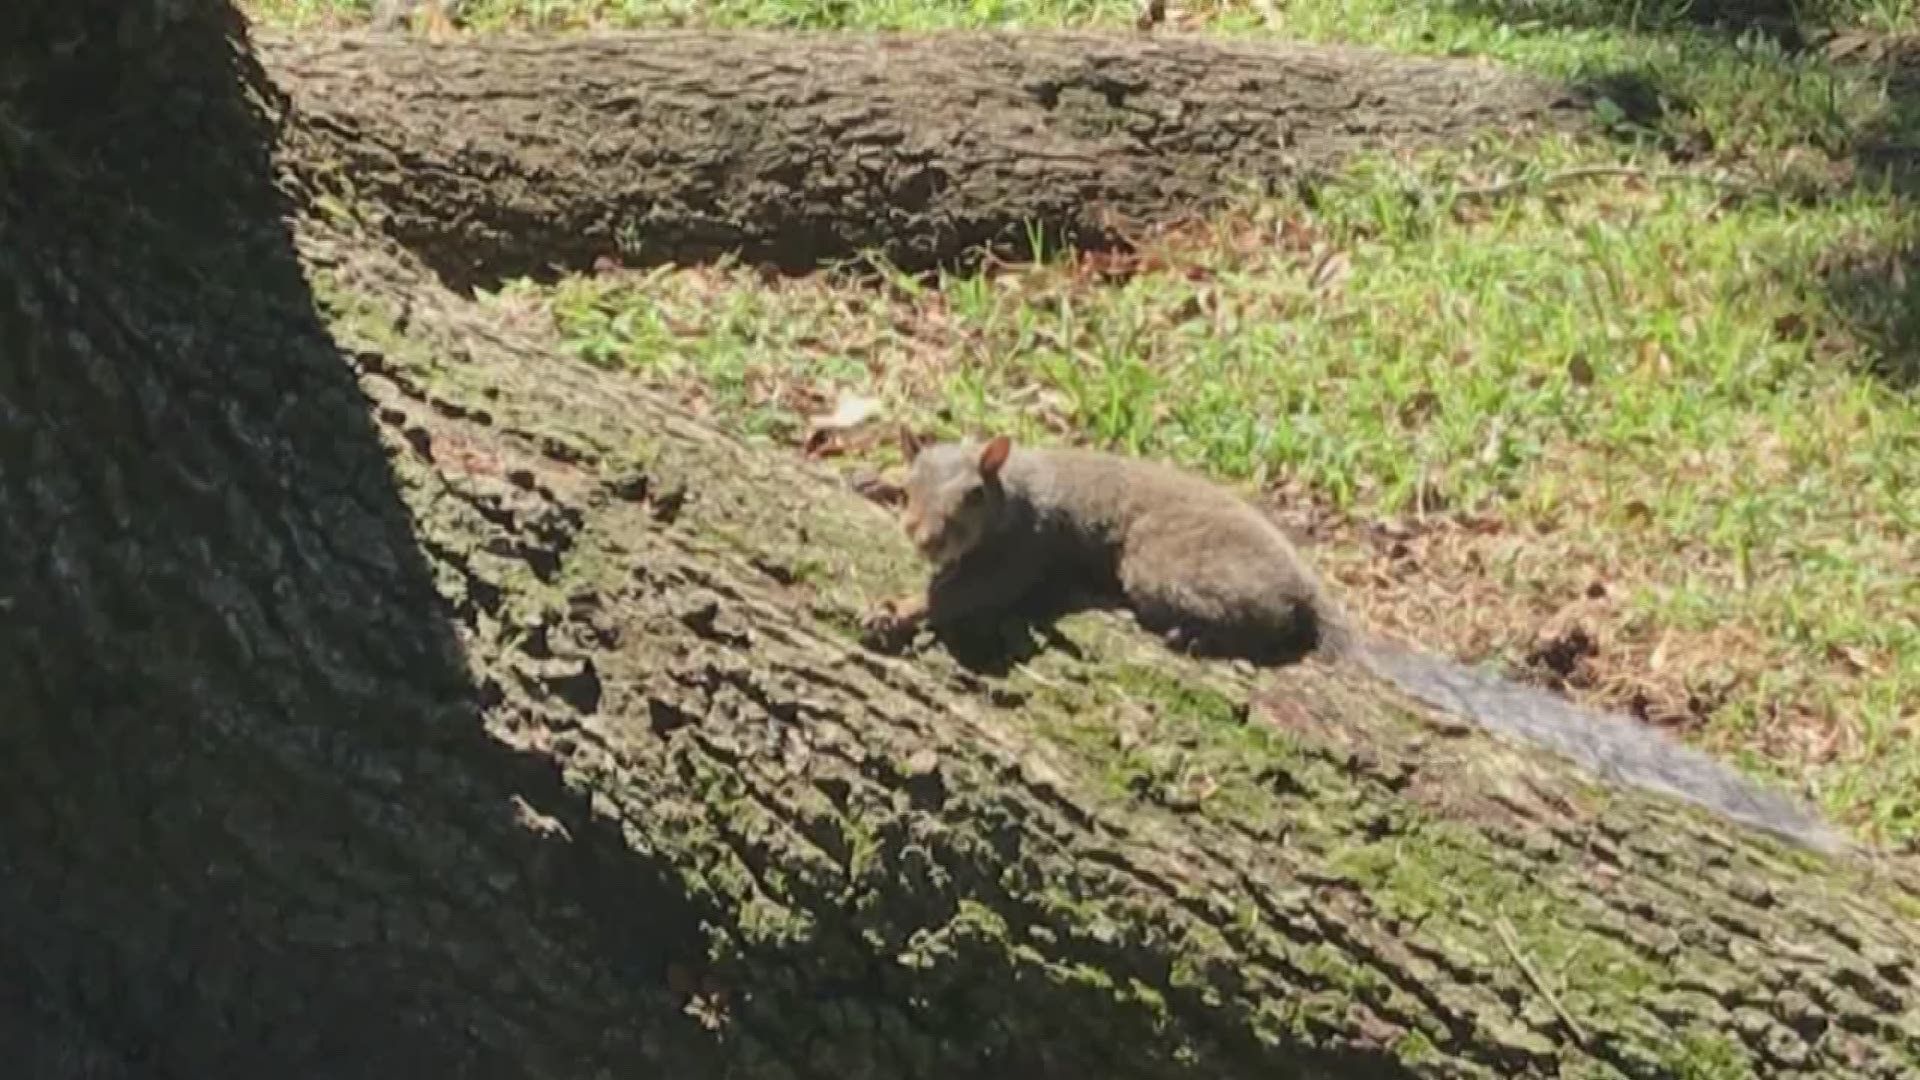 At least four attacks by aggressive squirrels have been reported in Lake Vista - two of them near or on St. Pius Church grounds.